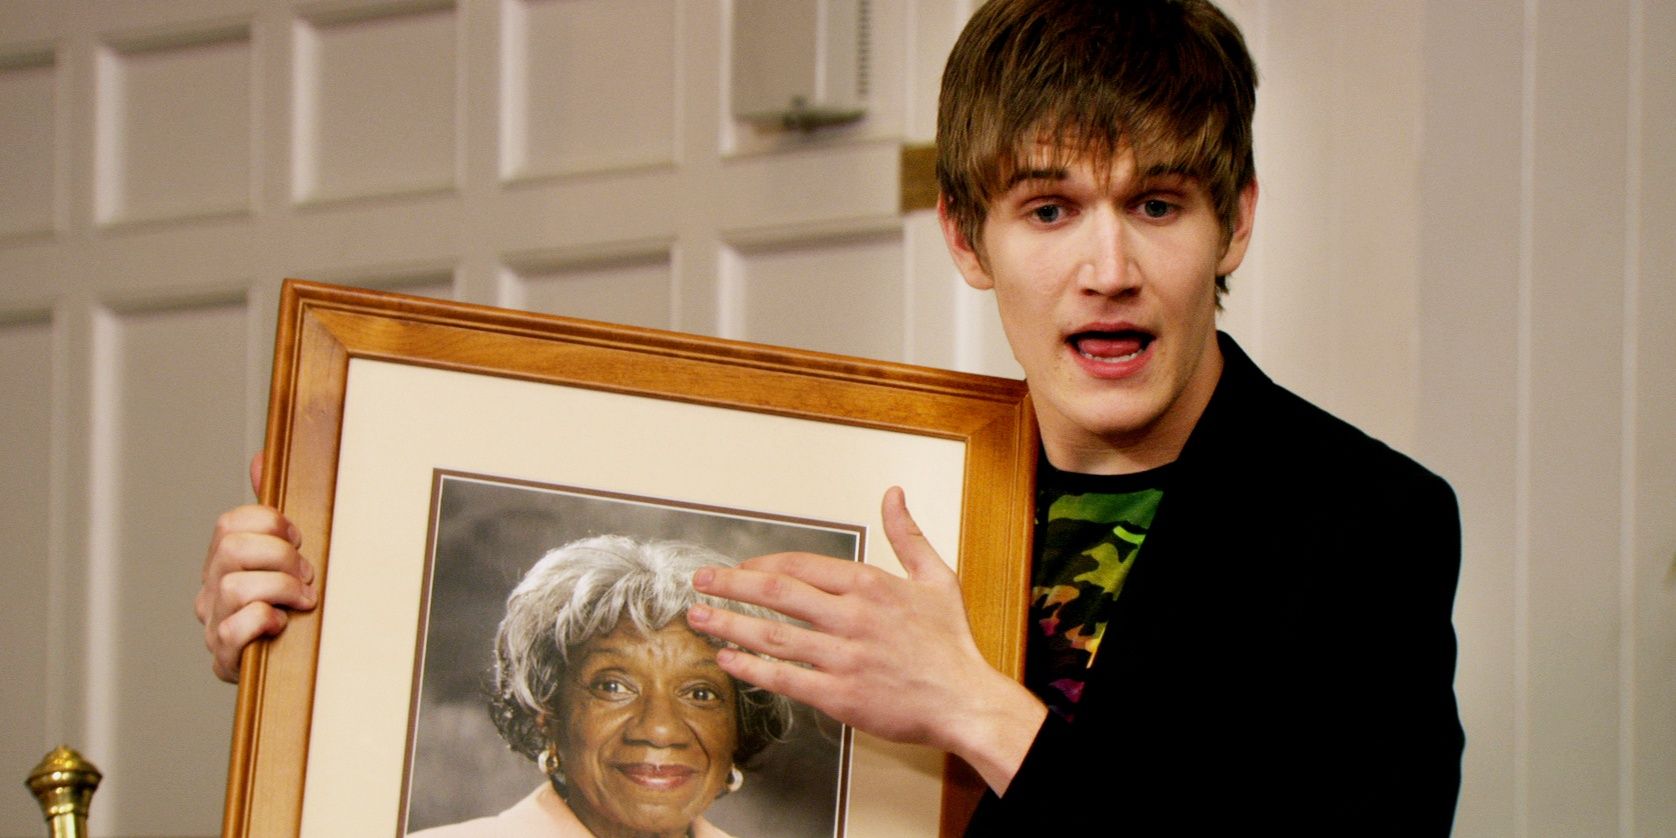 Main character Zack Stone holding a framed picture.